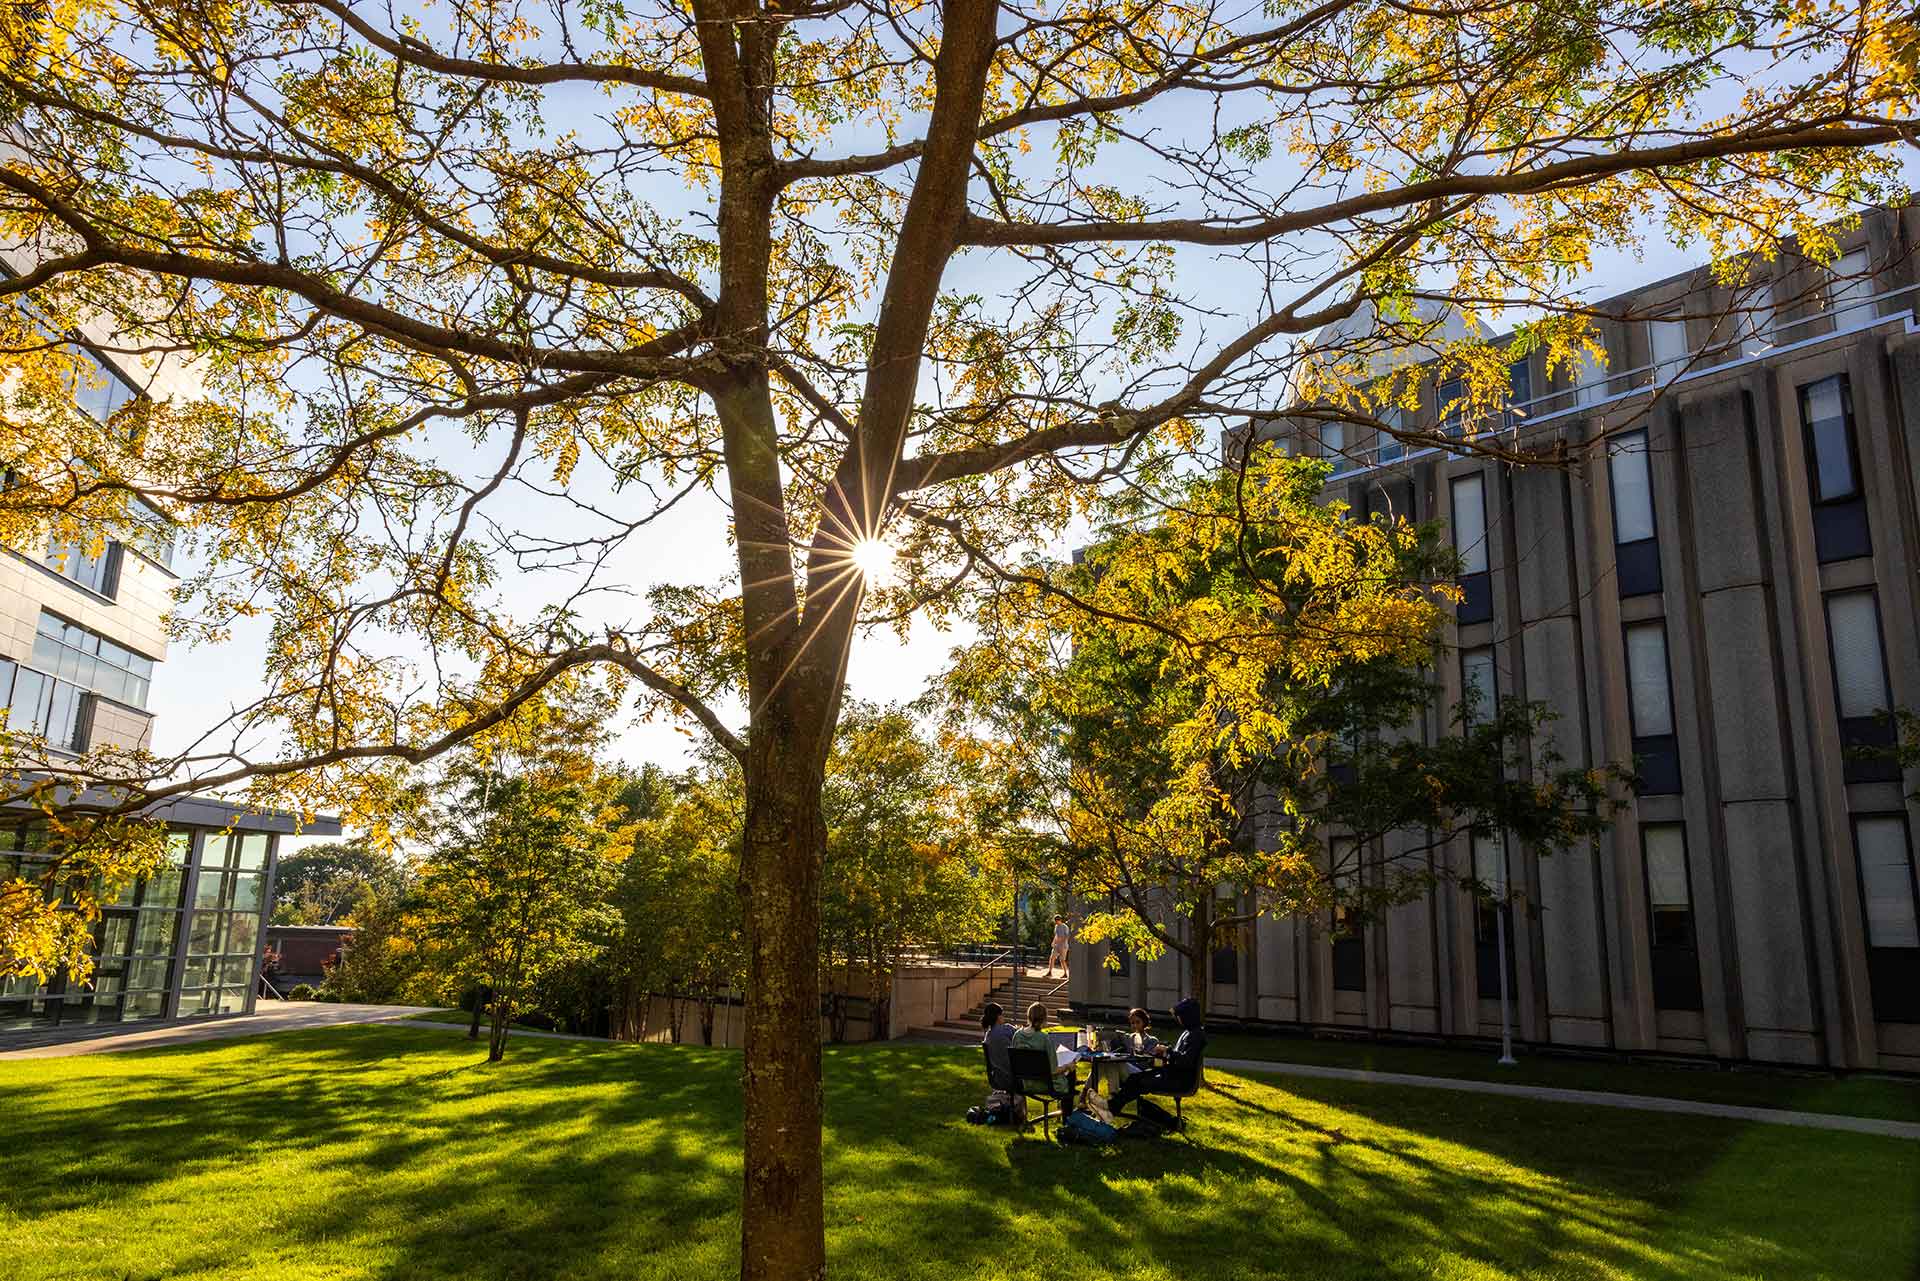 Sun shines through leaves on a tree in autumn as students sit at a table outside.